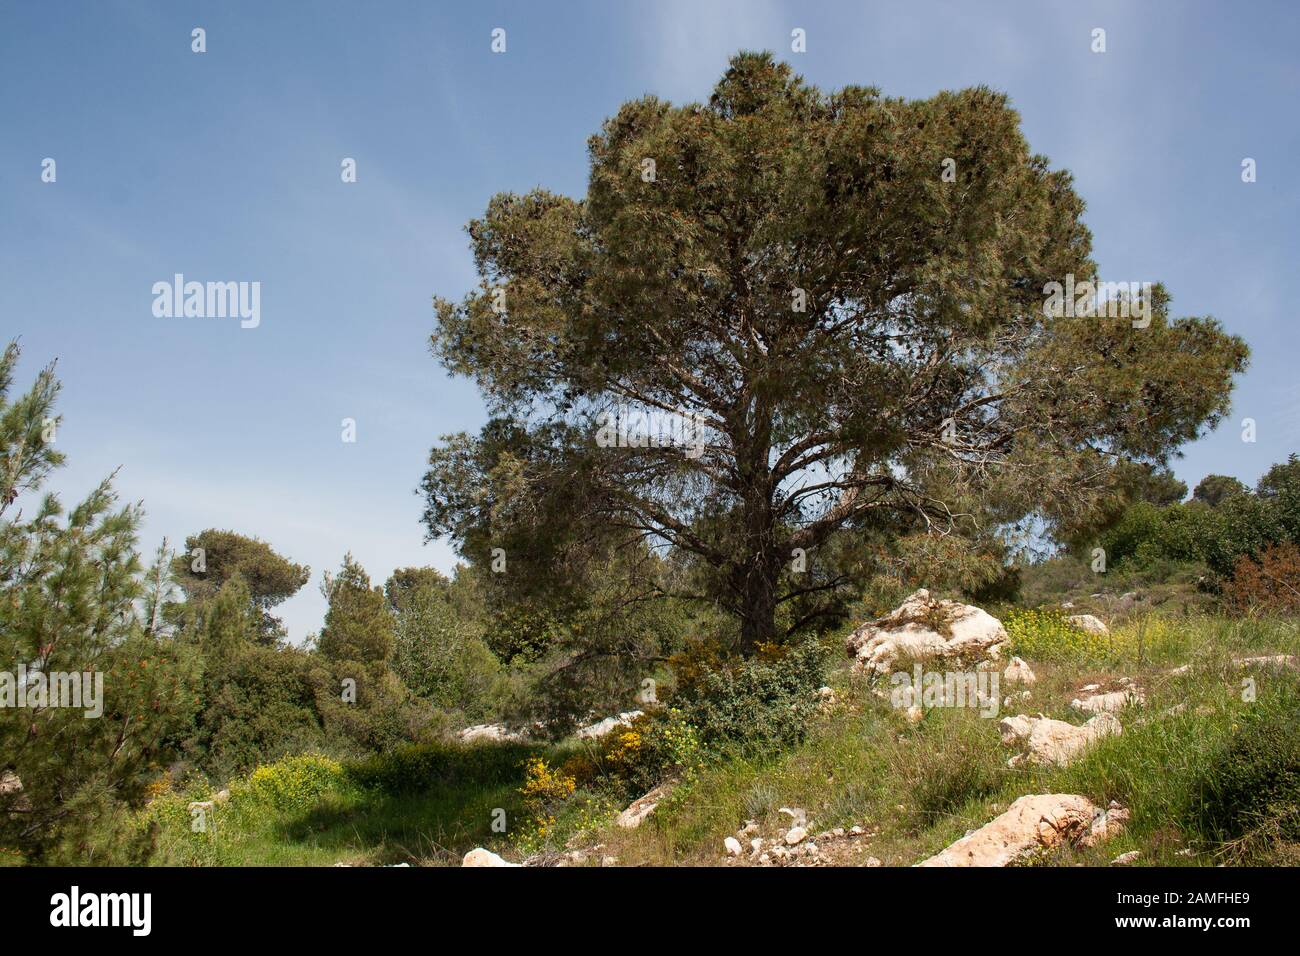 Pinus halepensis. Aleppo pine trees. Their origin is the Mediterreanean and Western Asia. In South Africa it is cultivated for shelter poles and for f Stock Photo